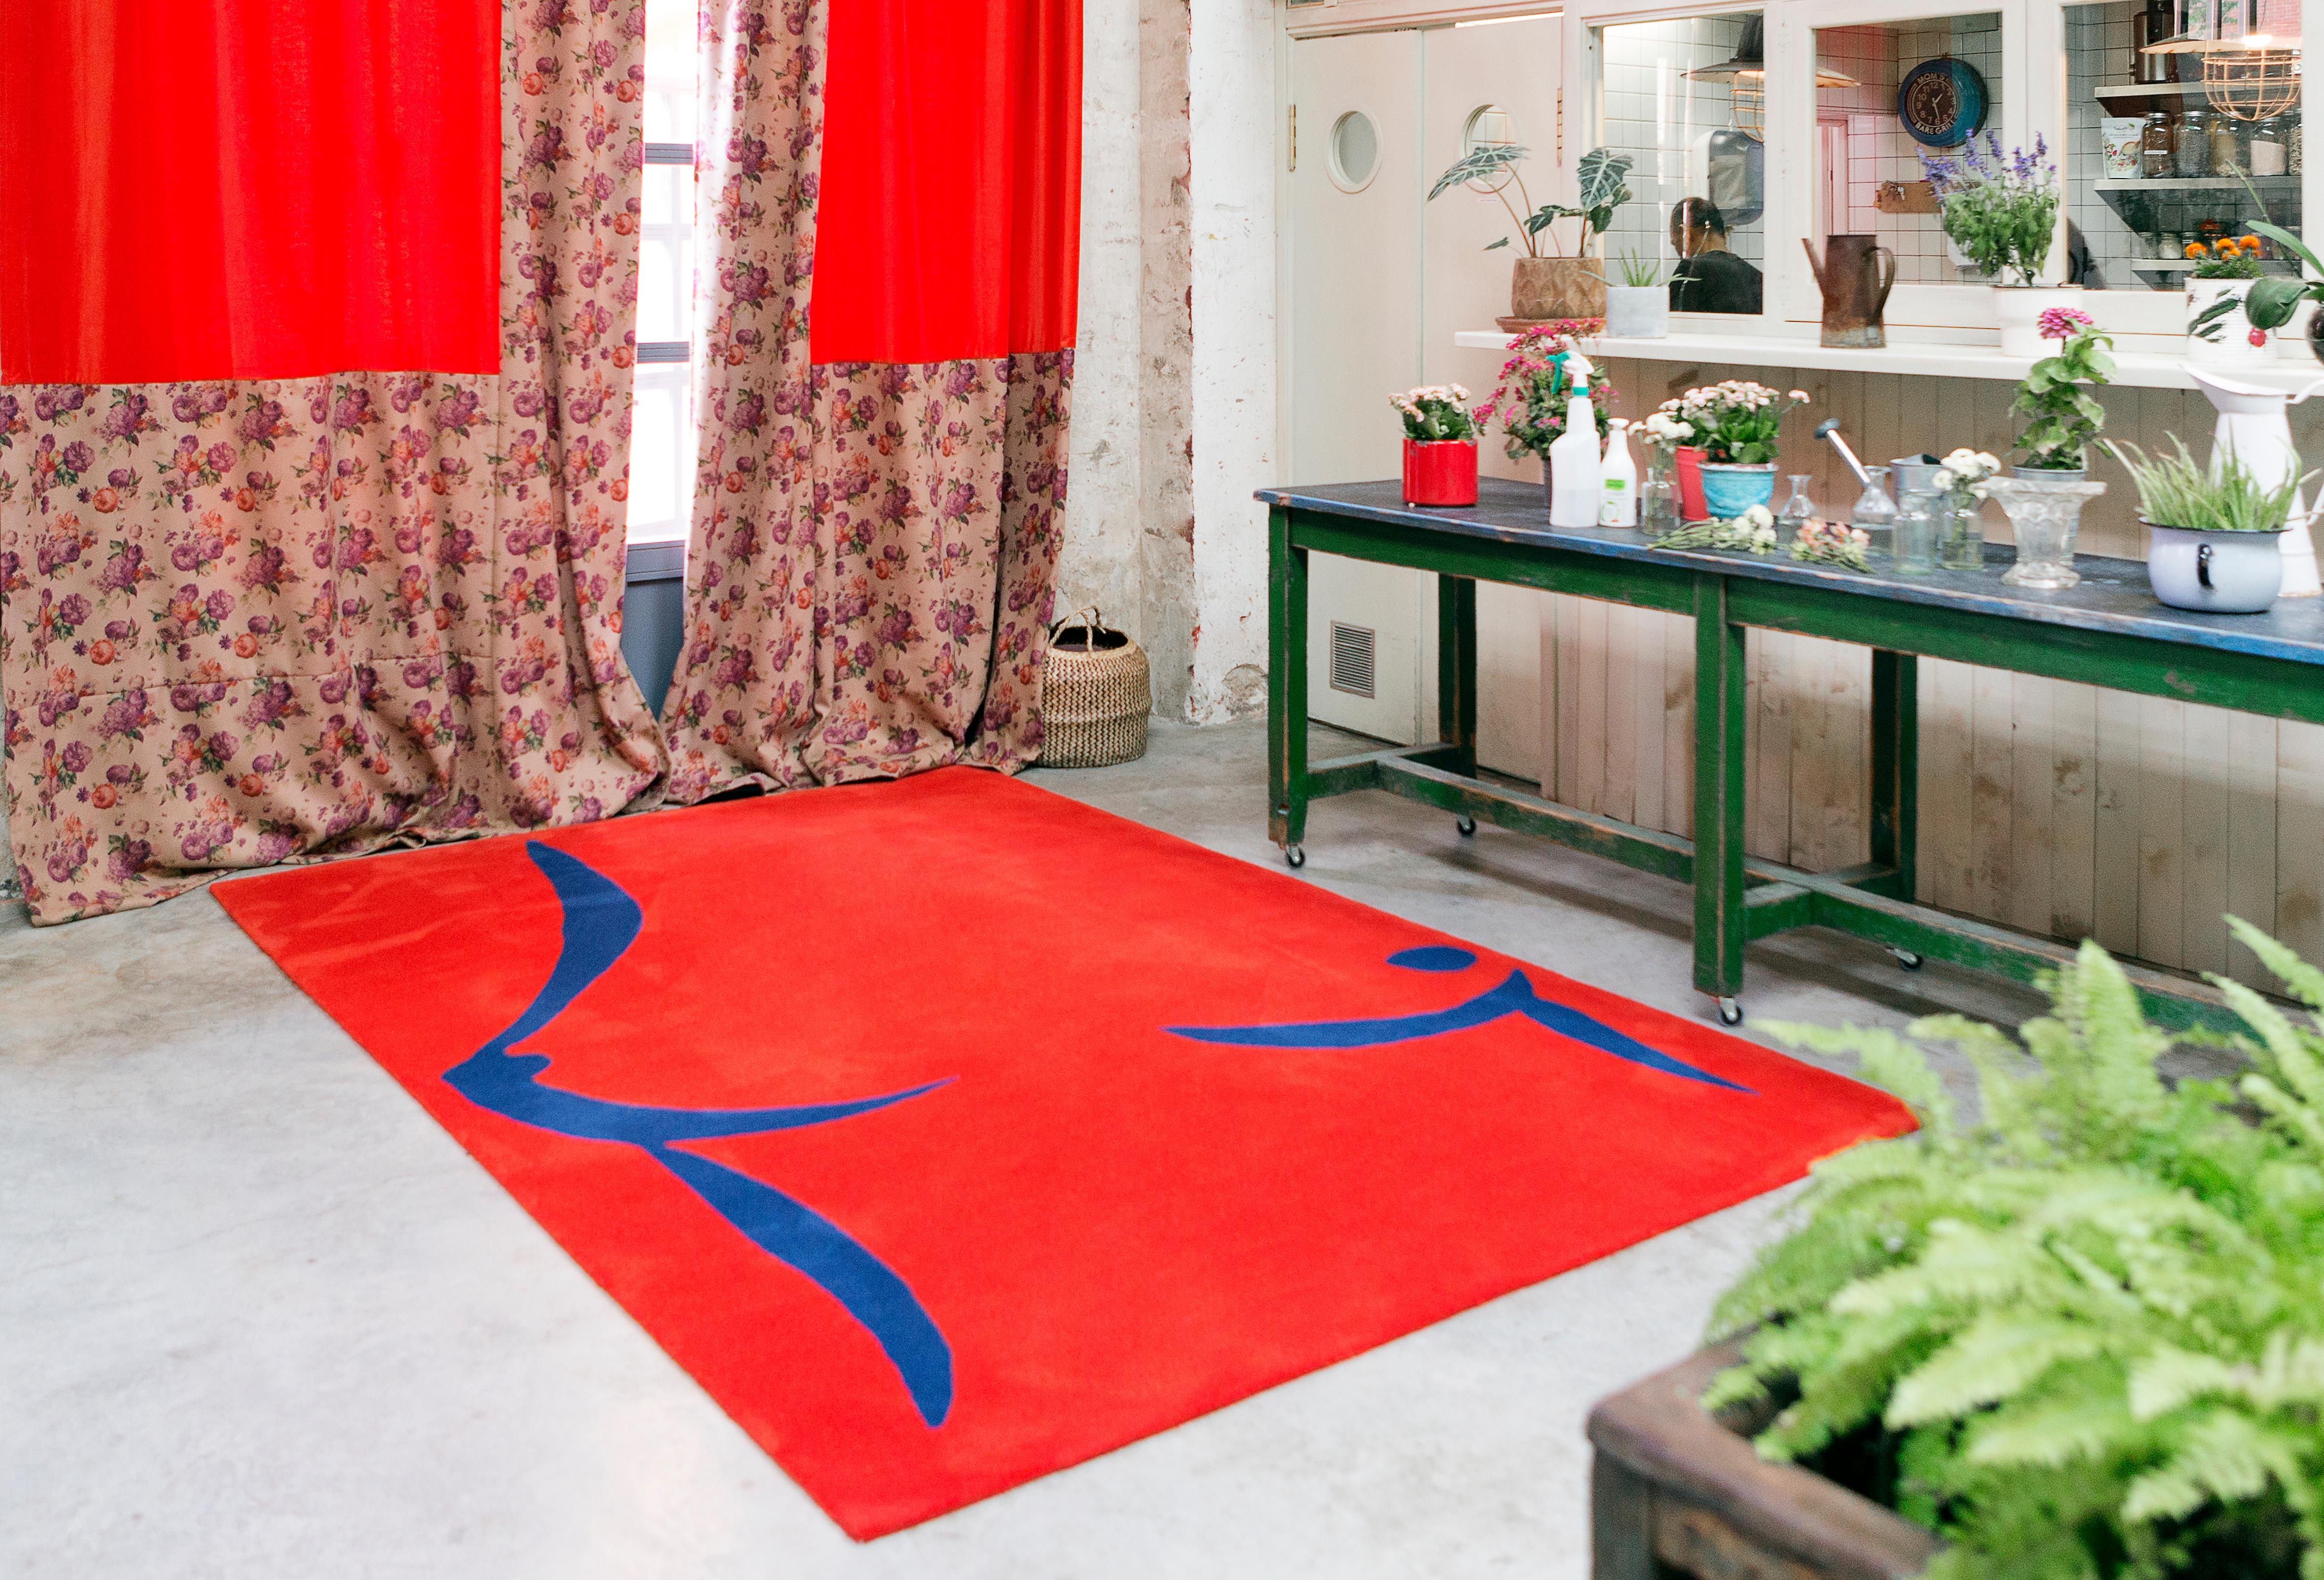 Hand-Crafted Modern Handtufted Wool Rug Carpet made in Spain Red and Blue Bust by Coco Davez For Sale